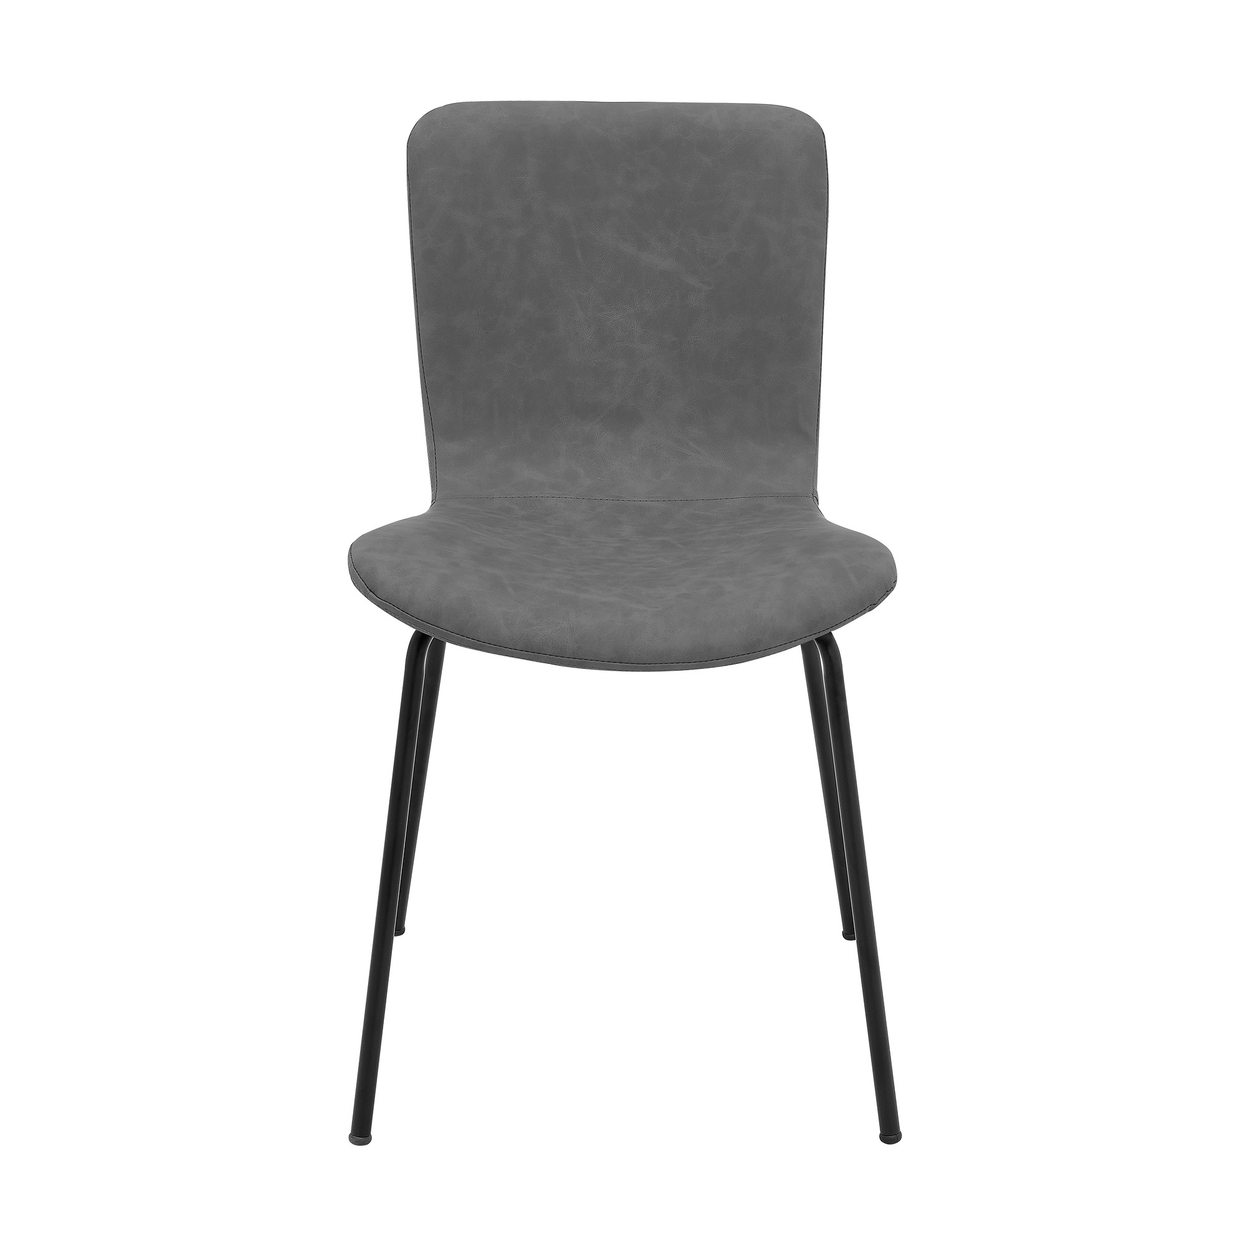 Metal And Fabric Dining Chair, Set Of 2, Gray And Black- Saltoro Sherpi